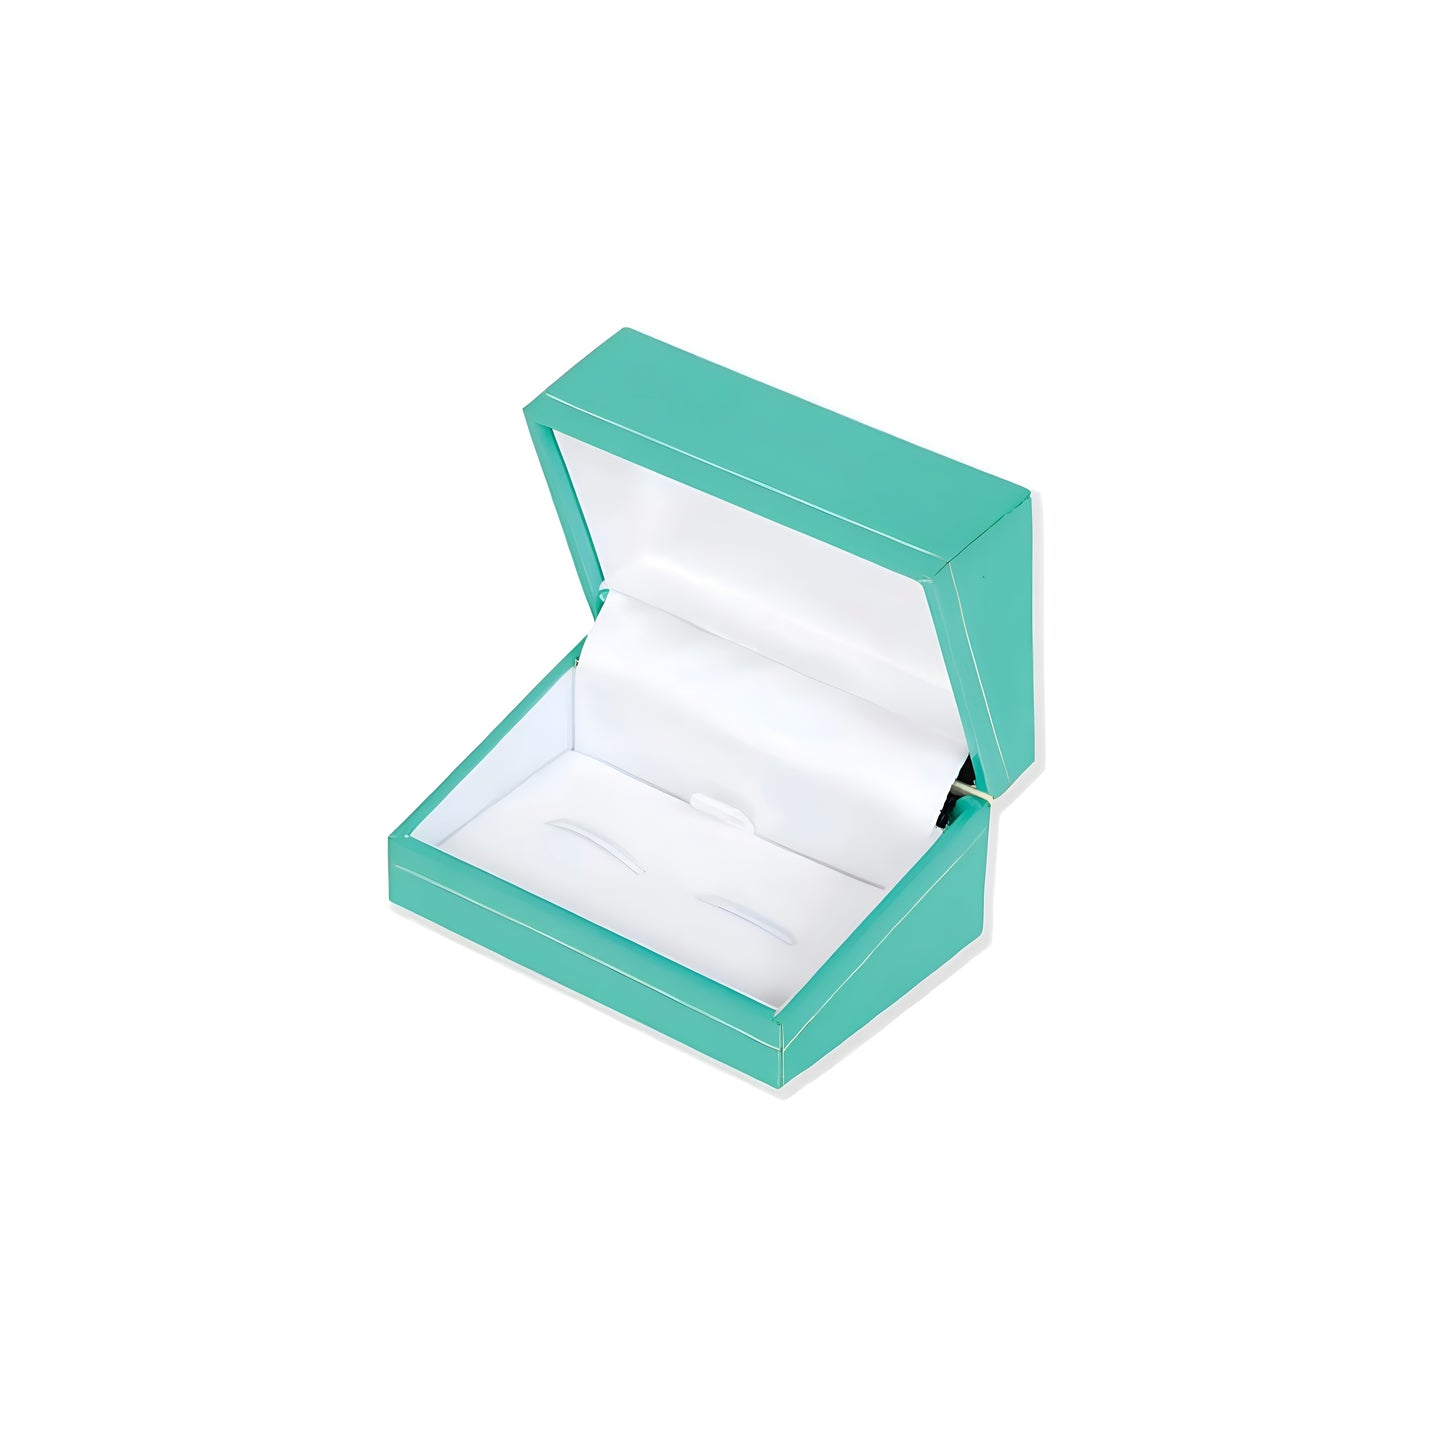 Milano Leatherette Cufflink Box - Light Green (Pack of 12)